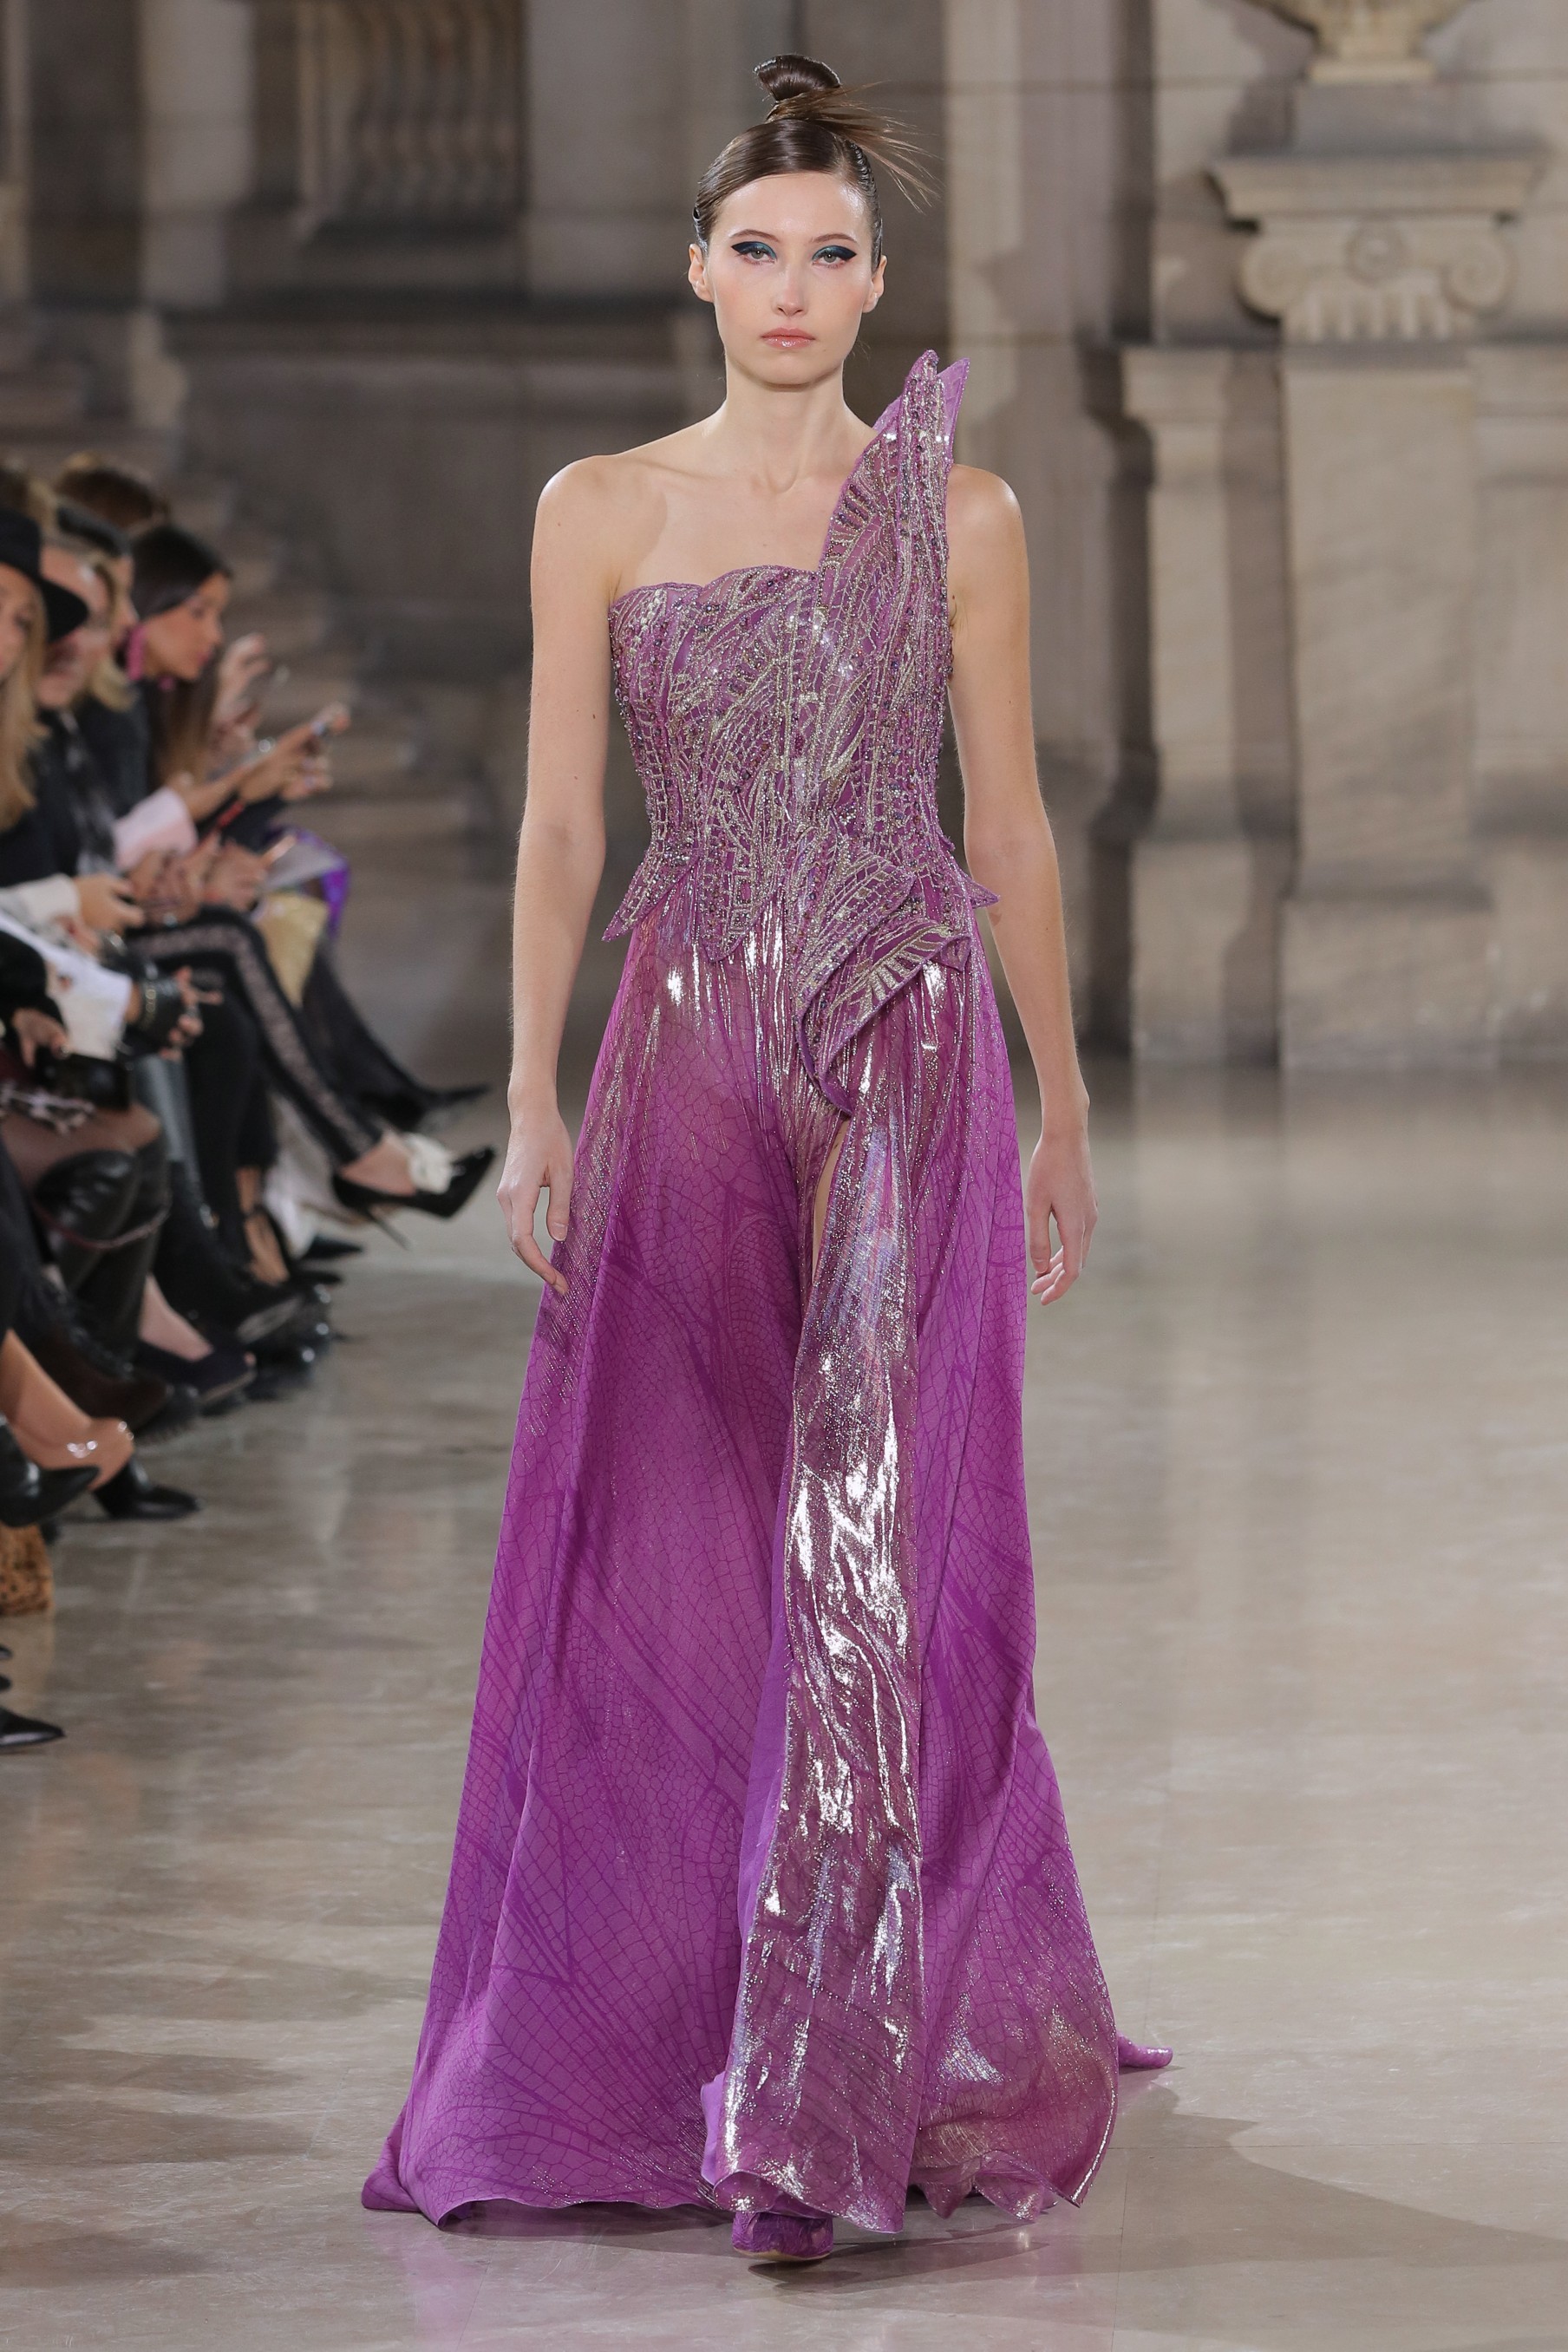 Spring 2019 Haute Couture: Tony Ward's Dragonflies — CoutureNotebook